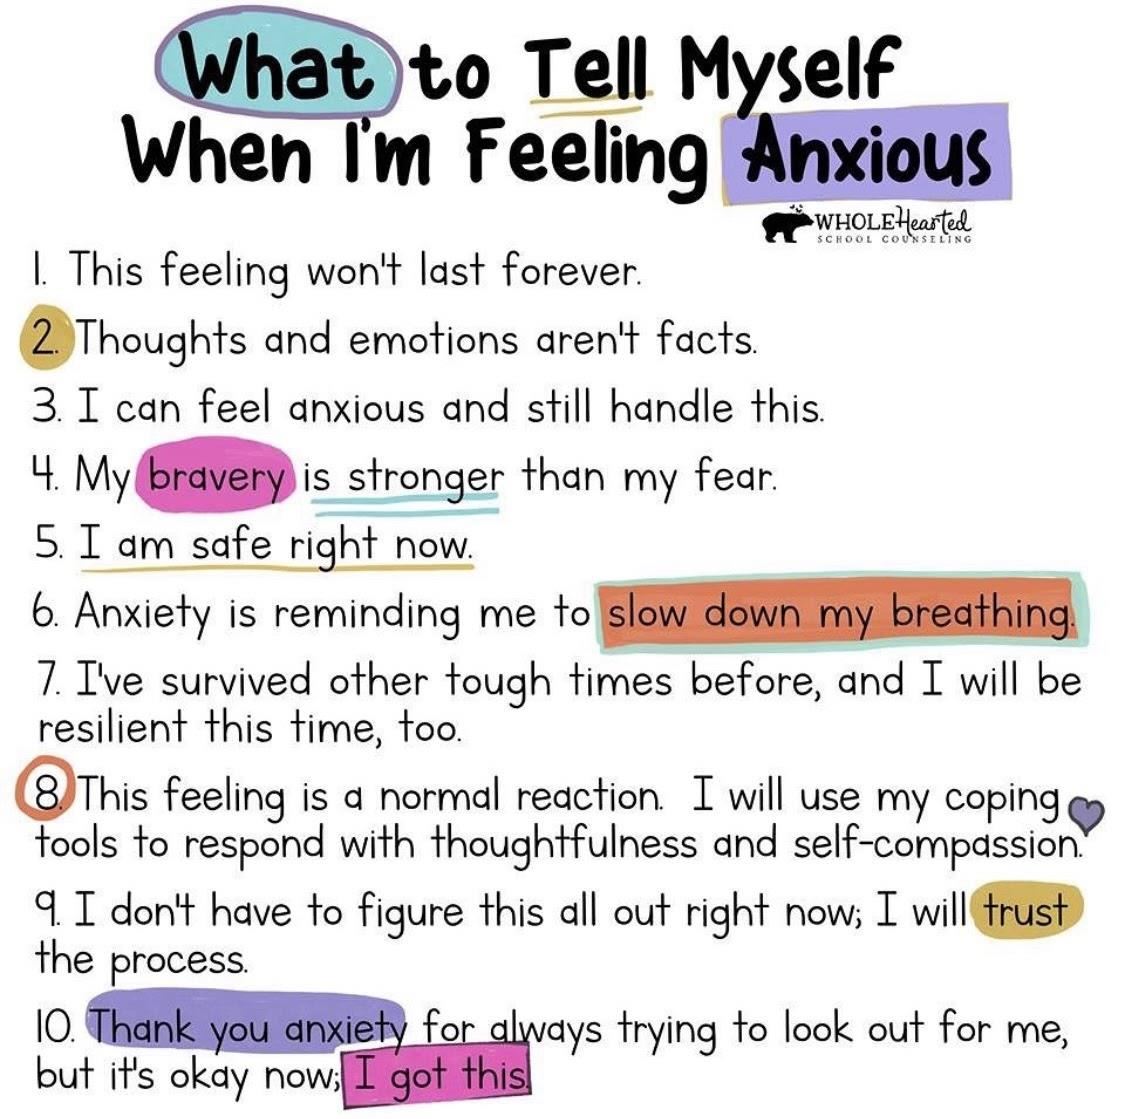 What to Tell Myself When I'm Feeling Anxious 